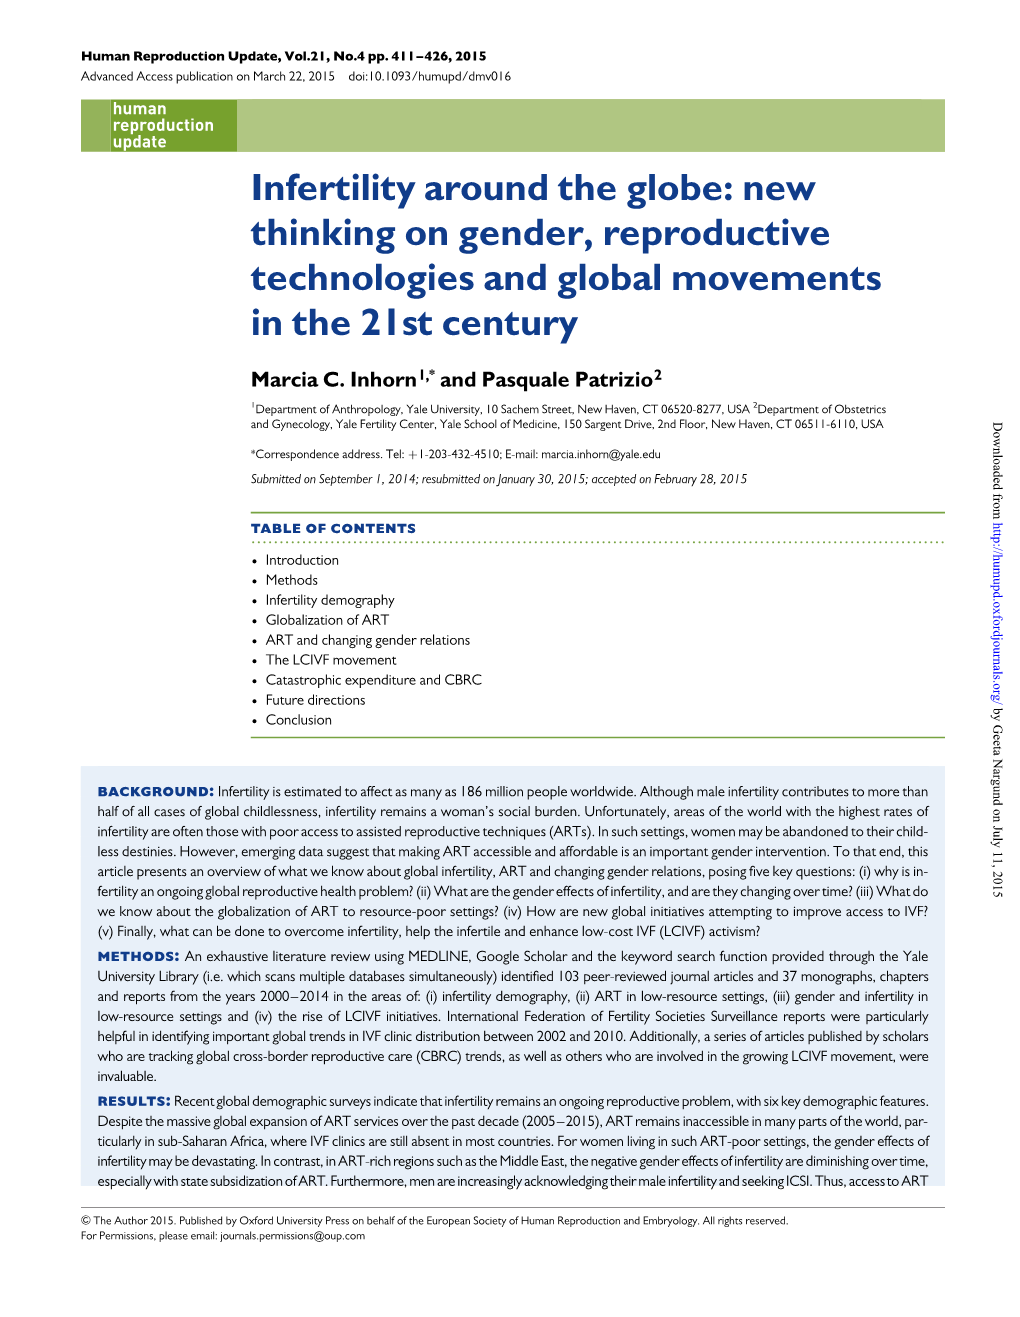 Infertility Around the Globe: New Thinking on Gender, Reproductive Technologies and Global Movements in the 21St Century